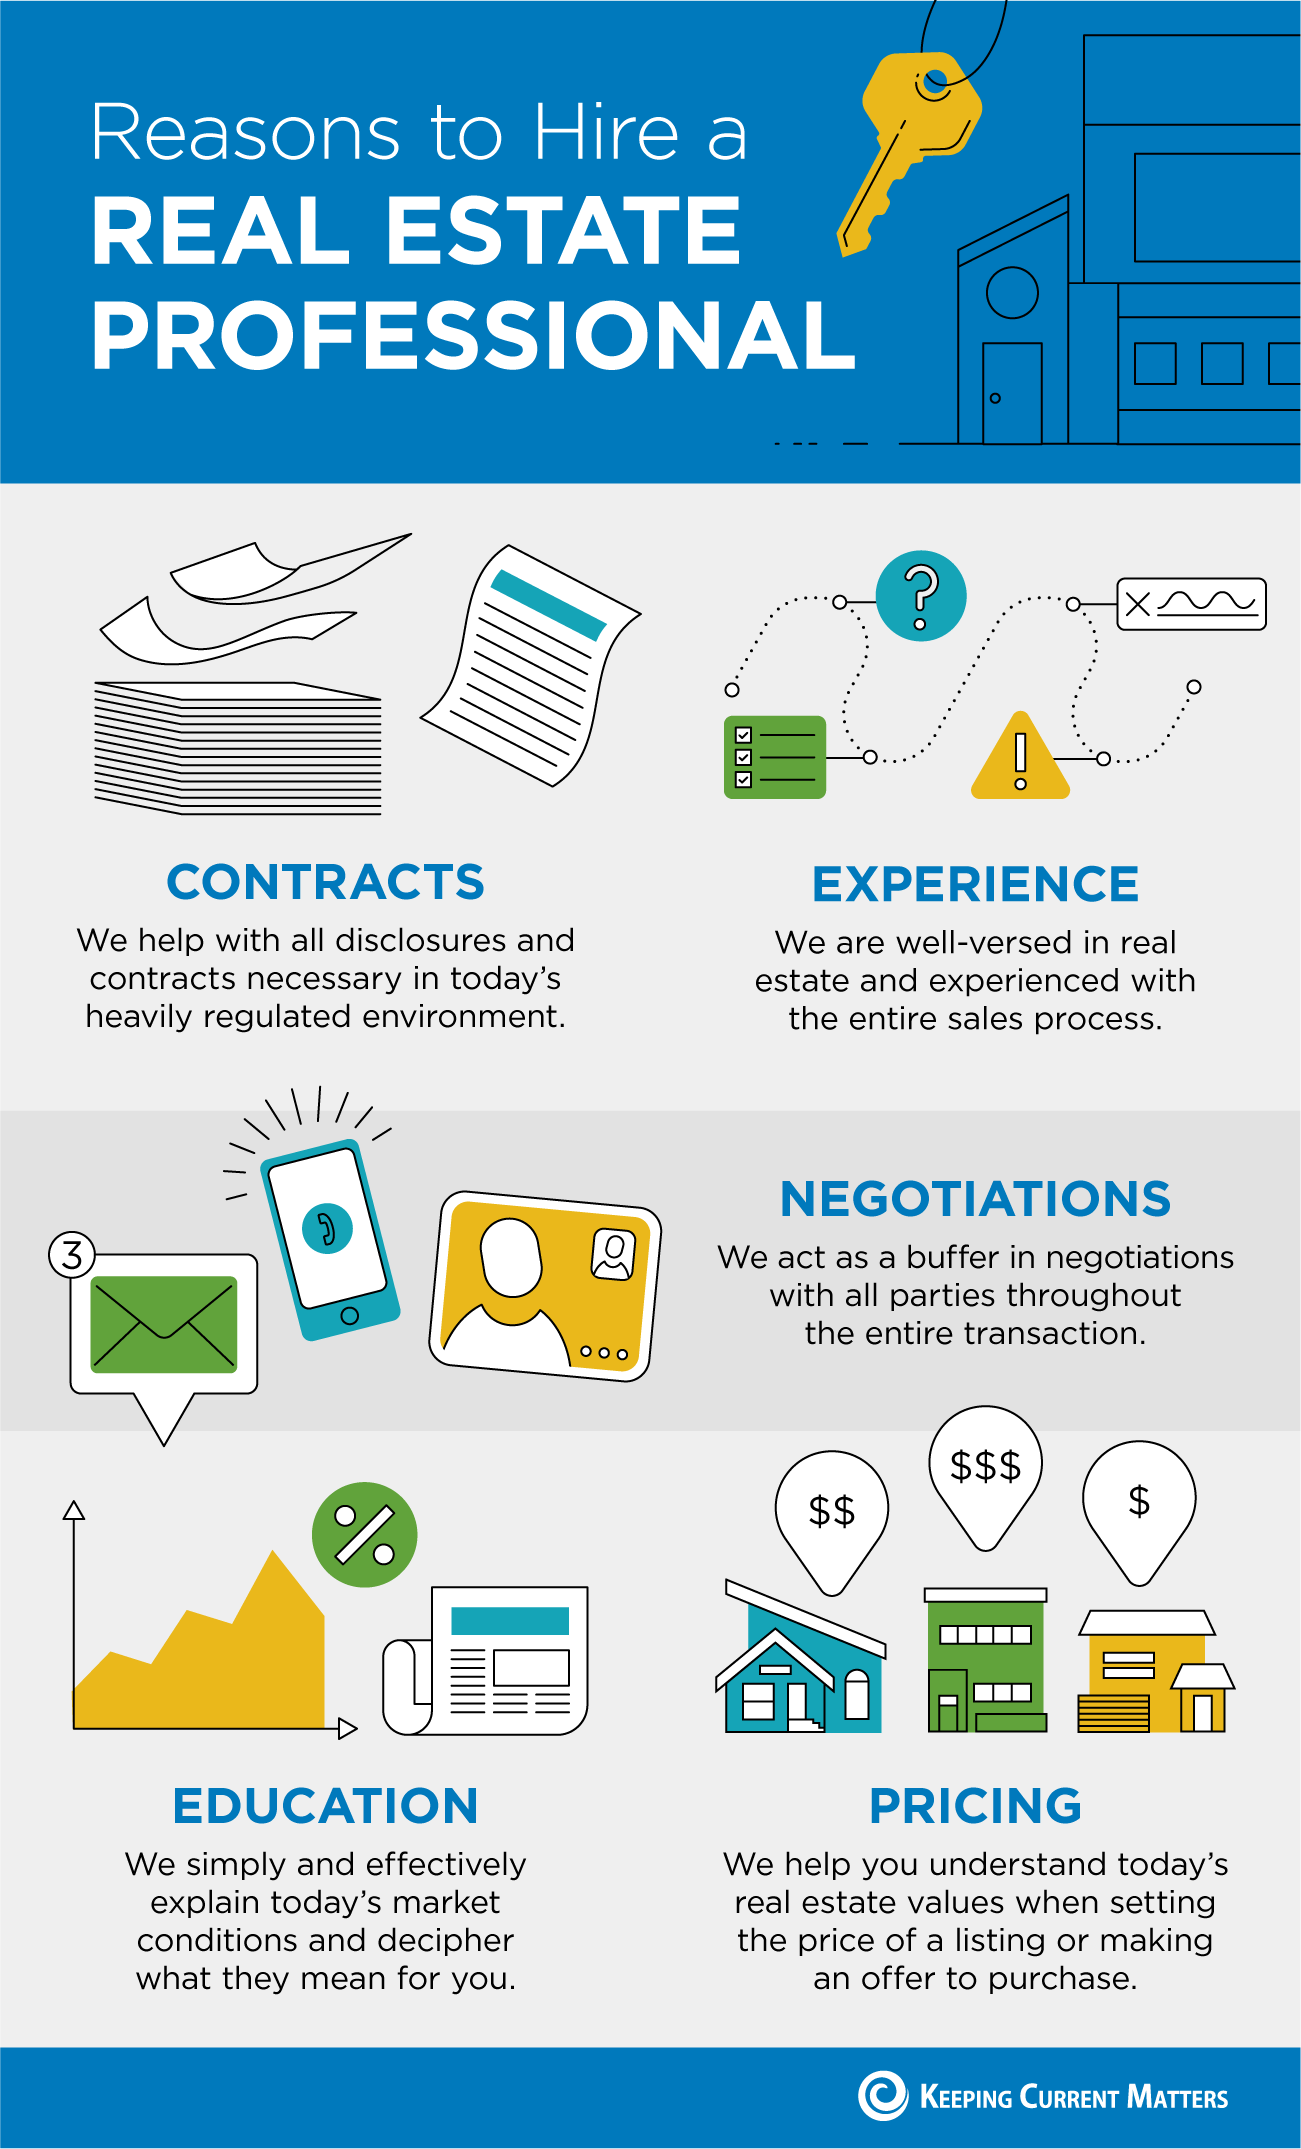 Reasons to Hire a Real Estate Professional [INFOGRAPHIC] | Keeping Current Matters